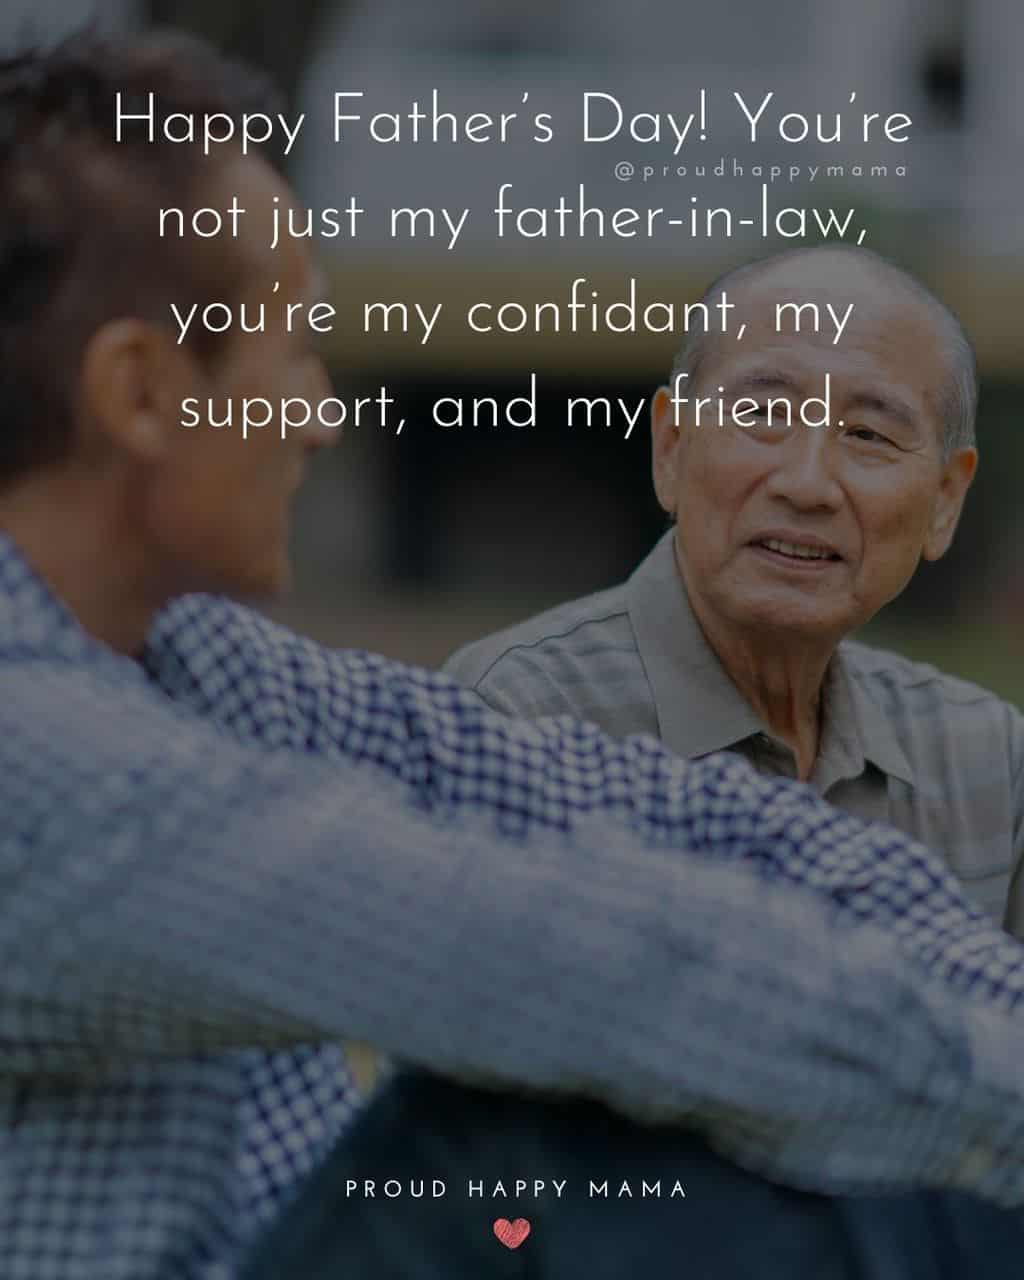 Happy Fathers Day Quotes For Father In Law - Happy Father’s Day! You’re not just my father-in-law, you’re my confidant, my